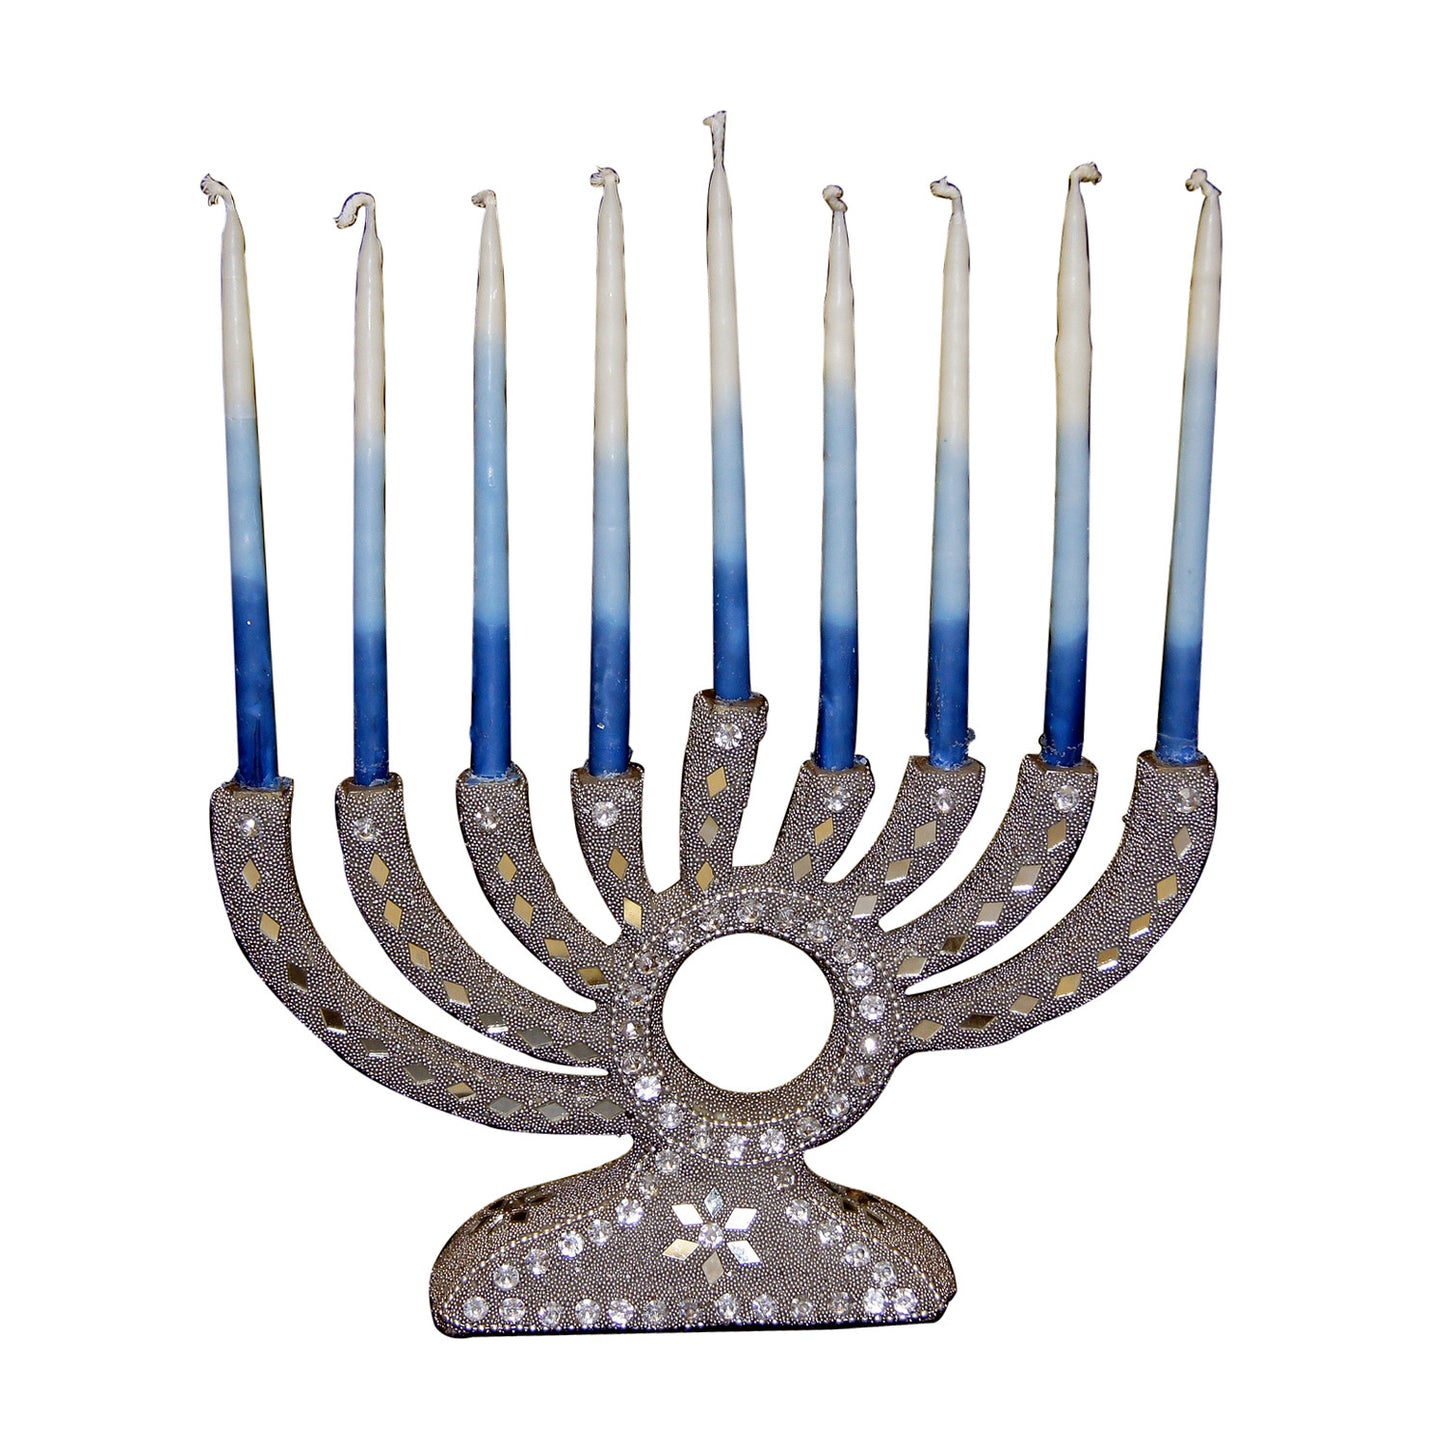 GiftBay 6047 Menorah - 9 Branch Amazingly Handcrafted with Thousands of Pewter/Silver Colored Beads, Crystals, Cut Mirror Pieces 9.25" L X 2"w X 6" H